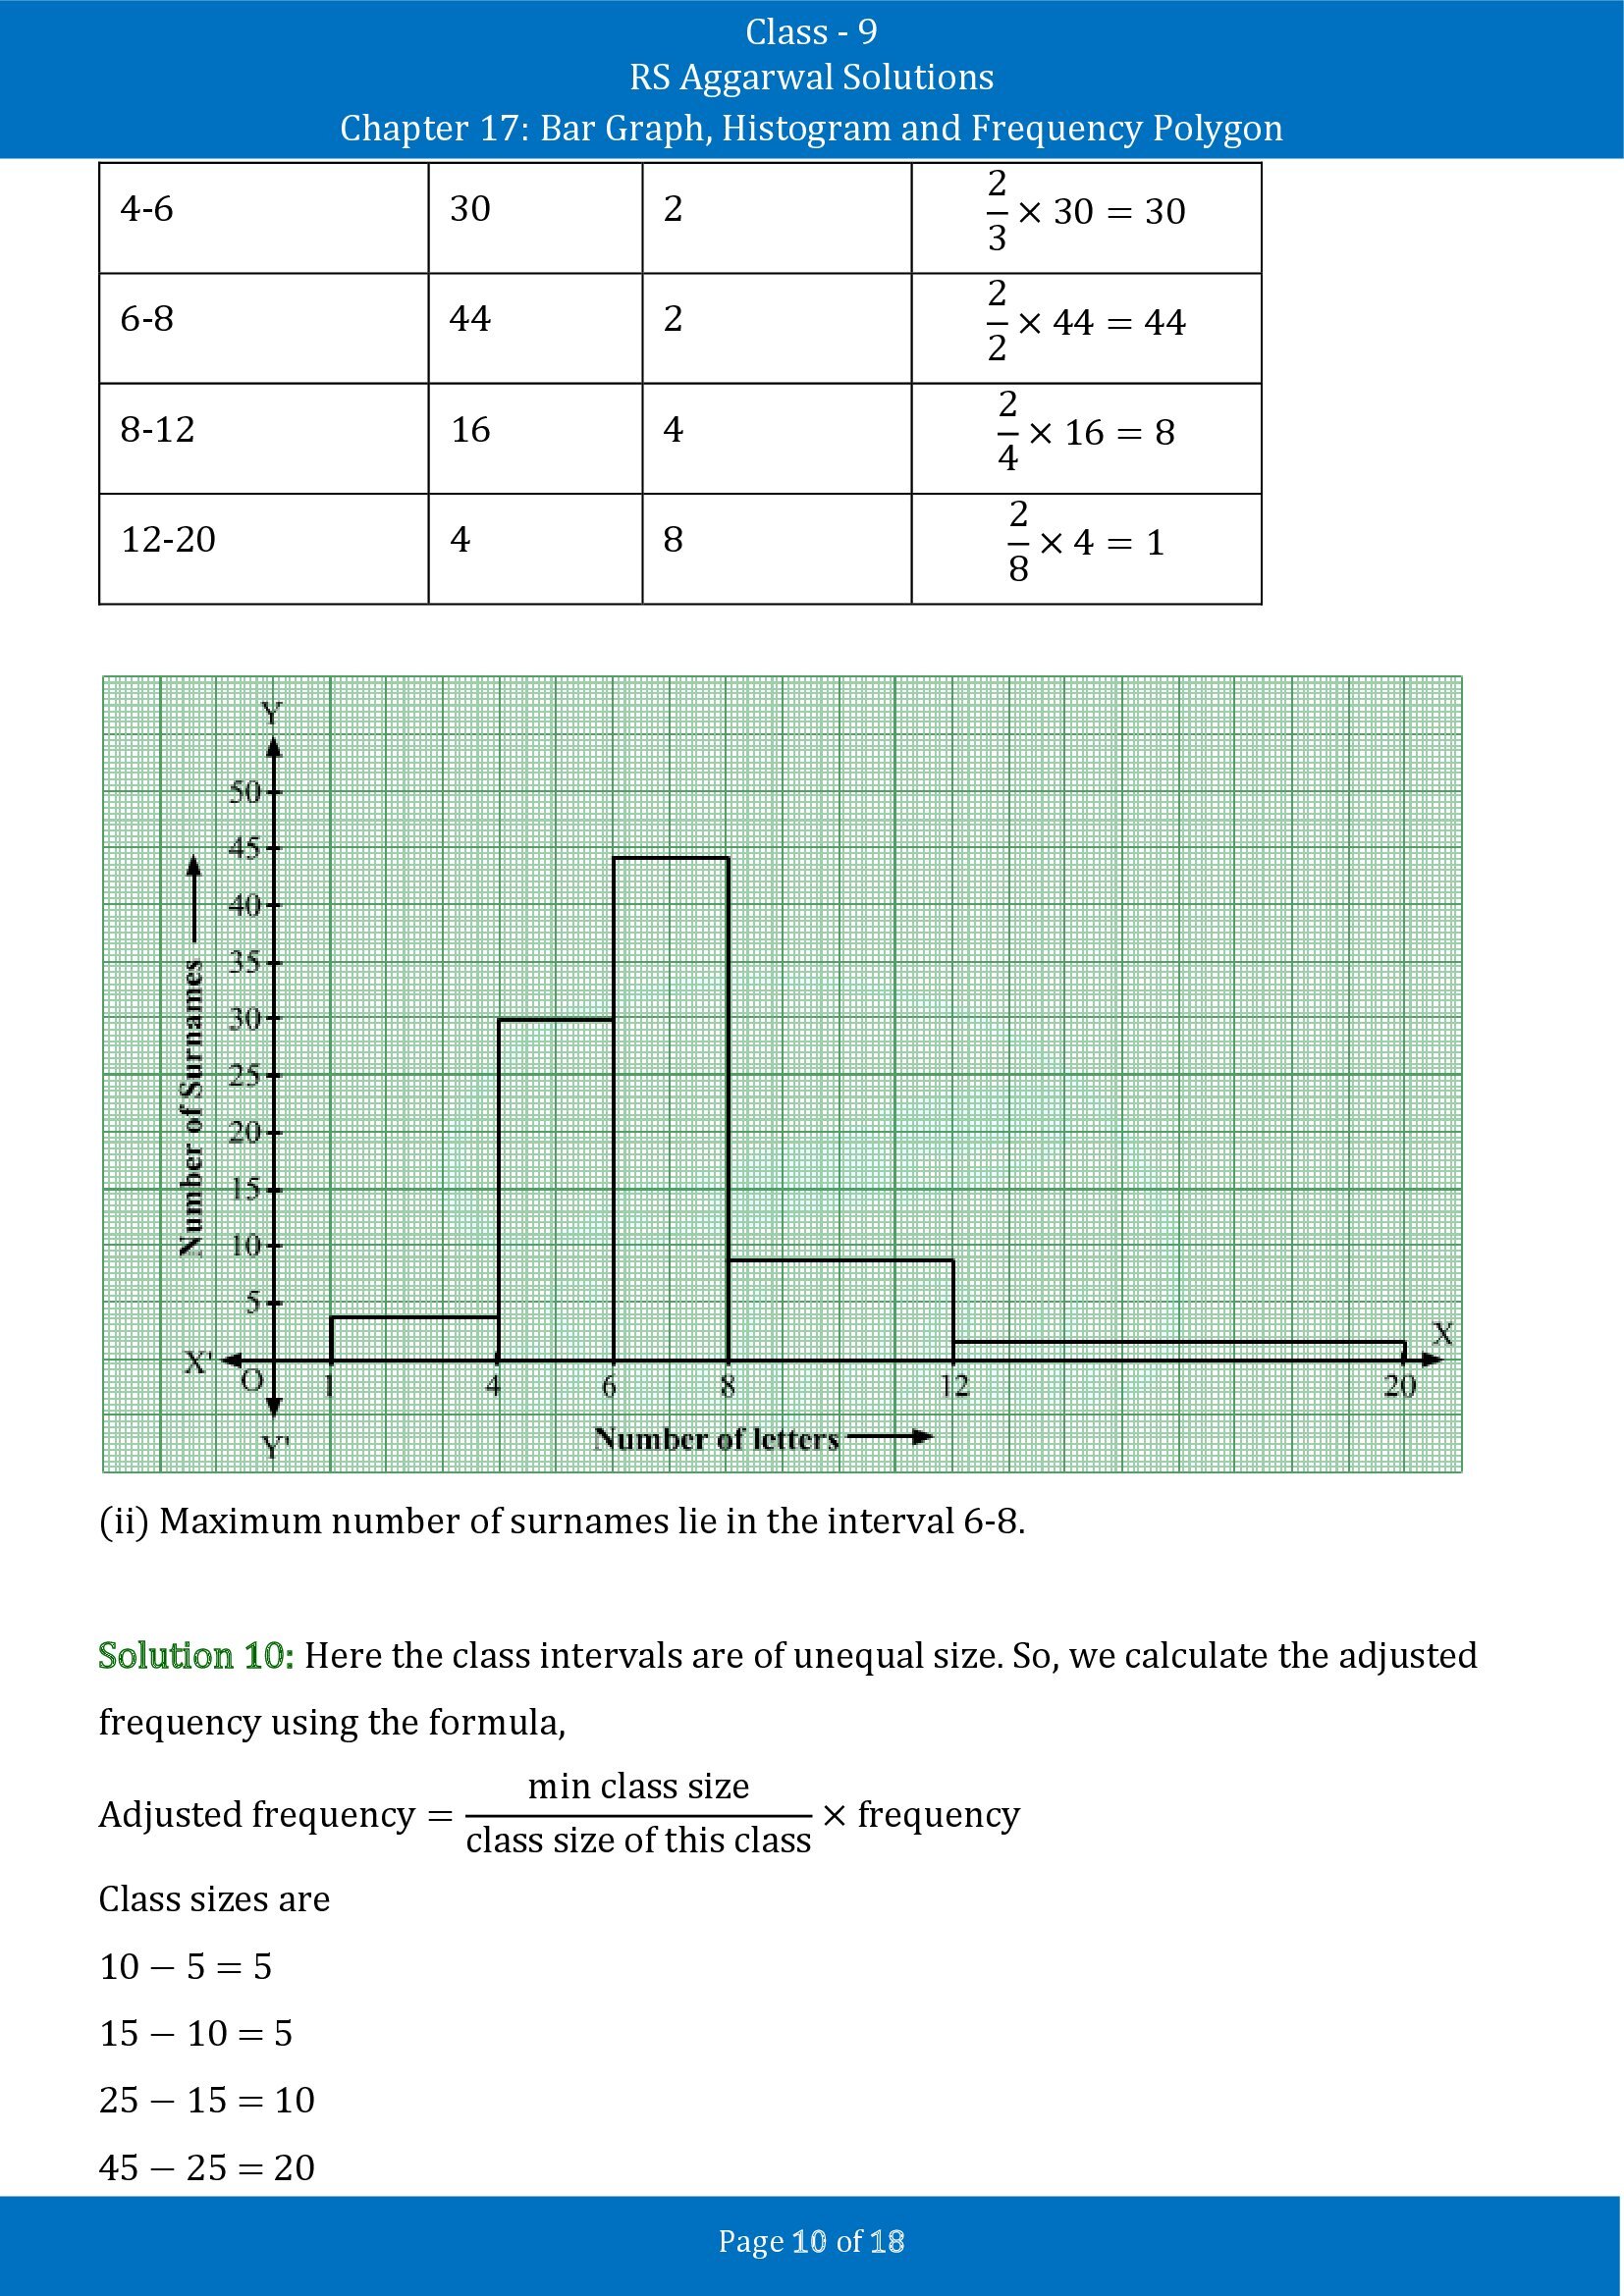 RS Aggarwal Solutions Class 9 Chapter 17 Bar Graph Histogram and Frequency Polygon Exercise 17B 00010